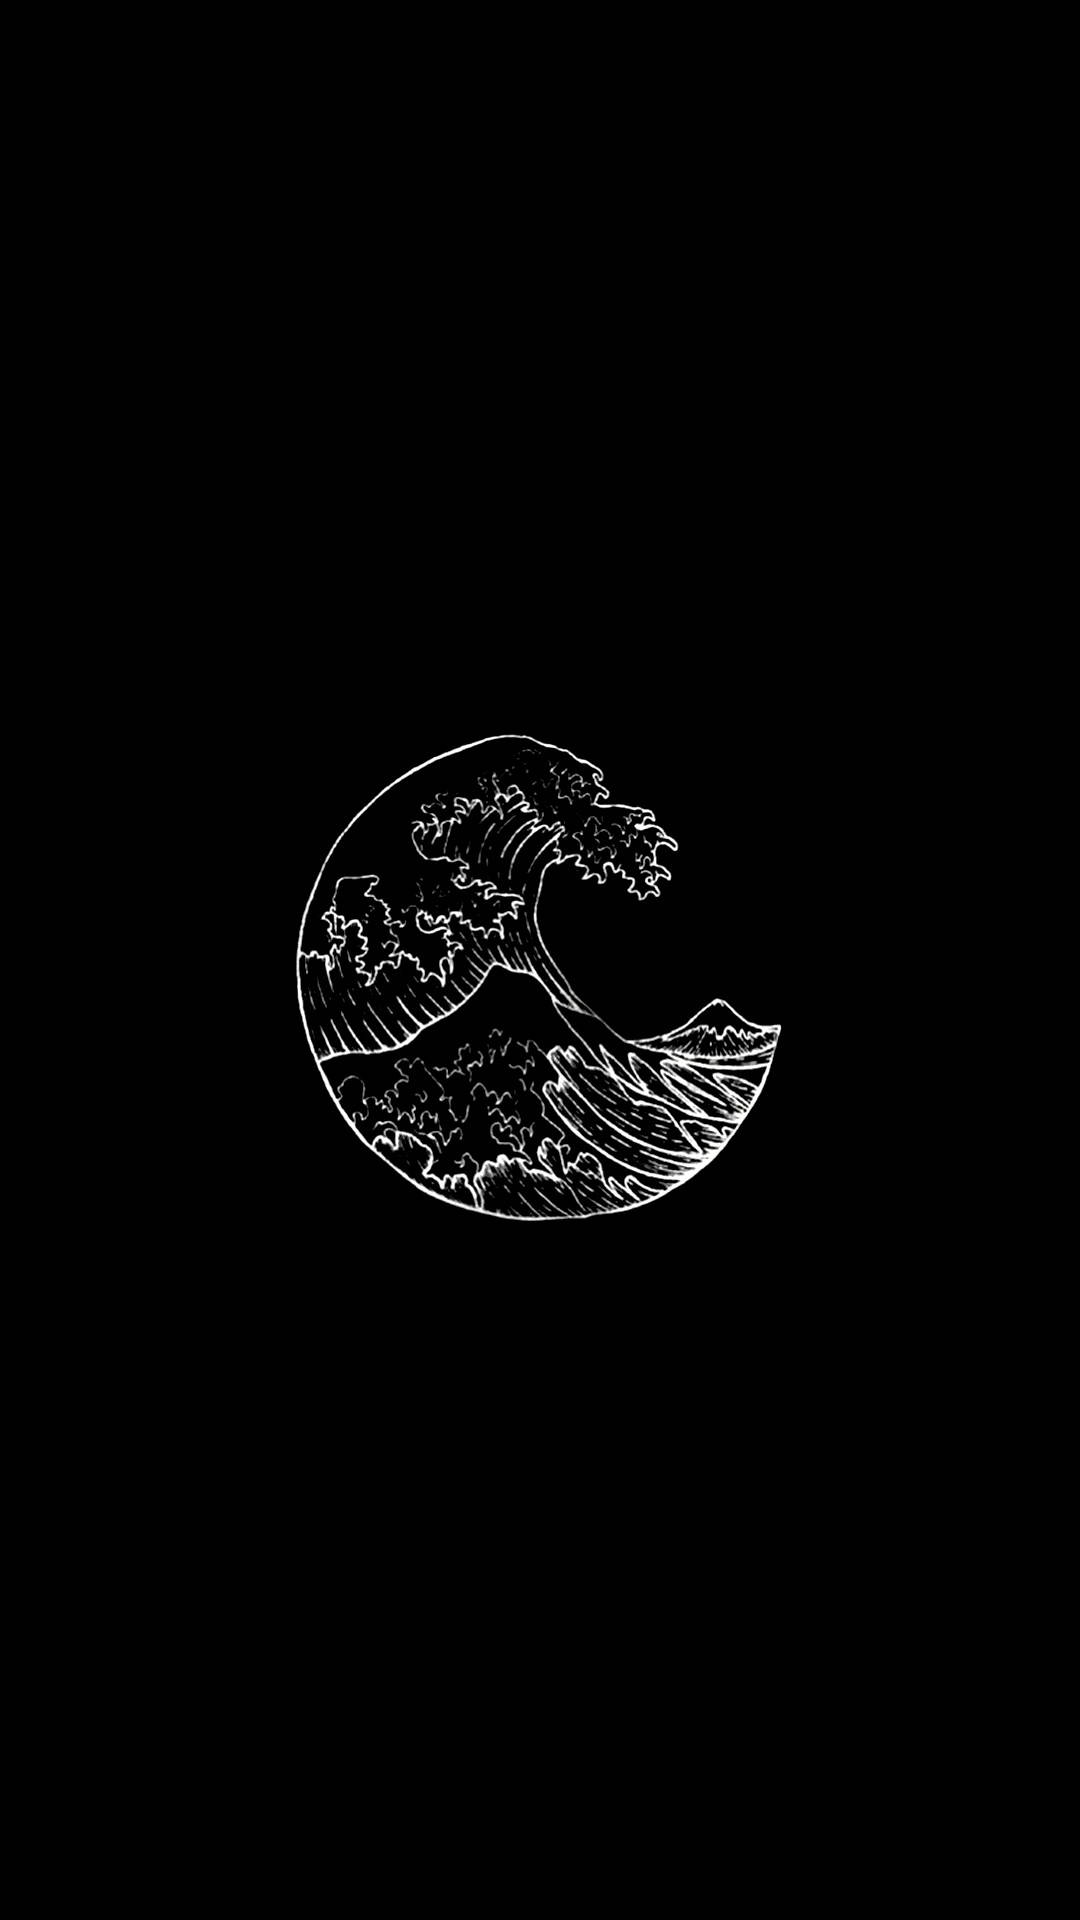 Download The Great Wave Logo In Solid Black Wallpaper 